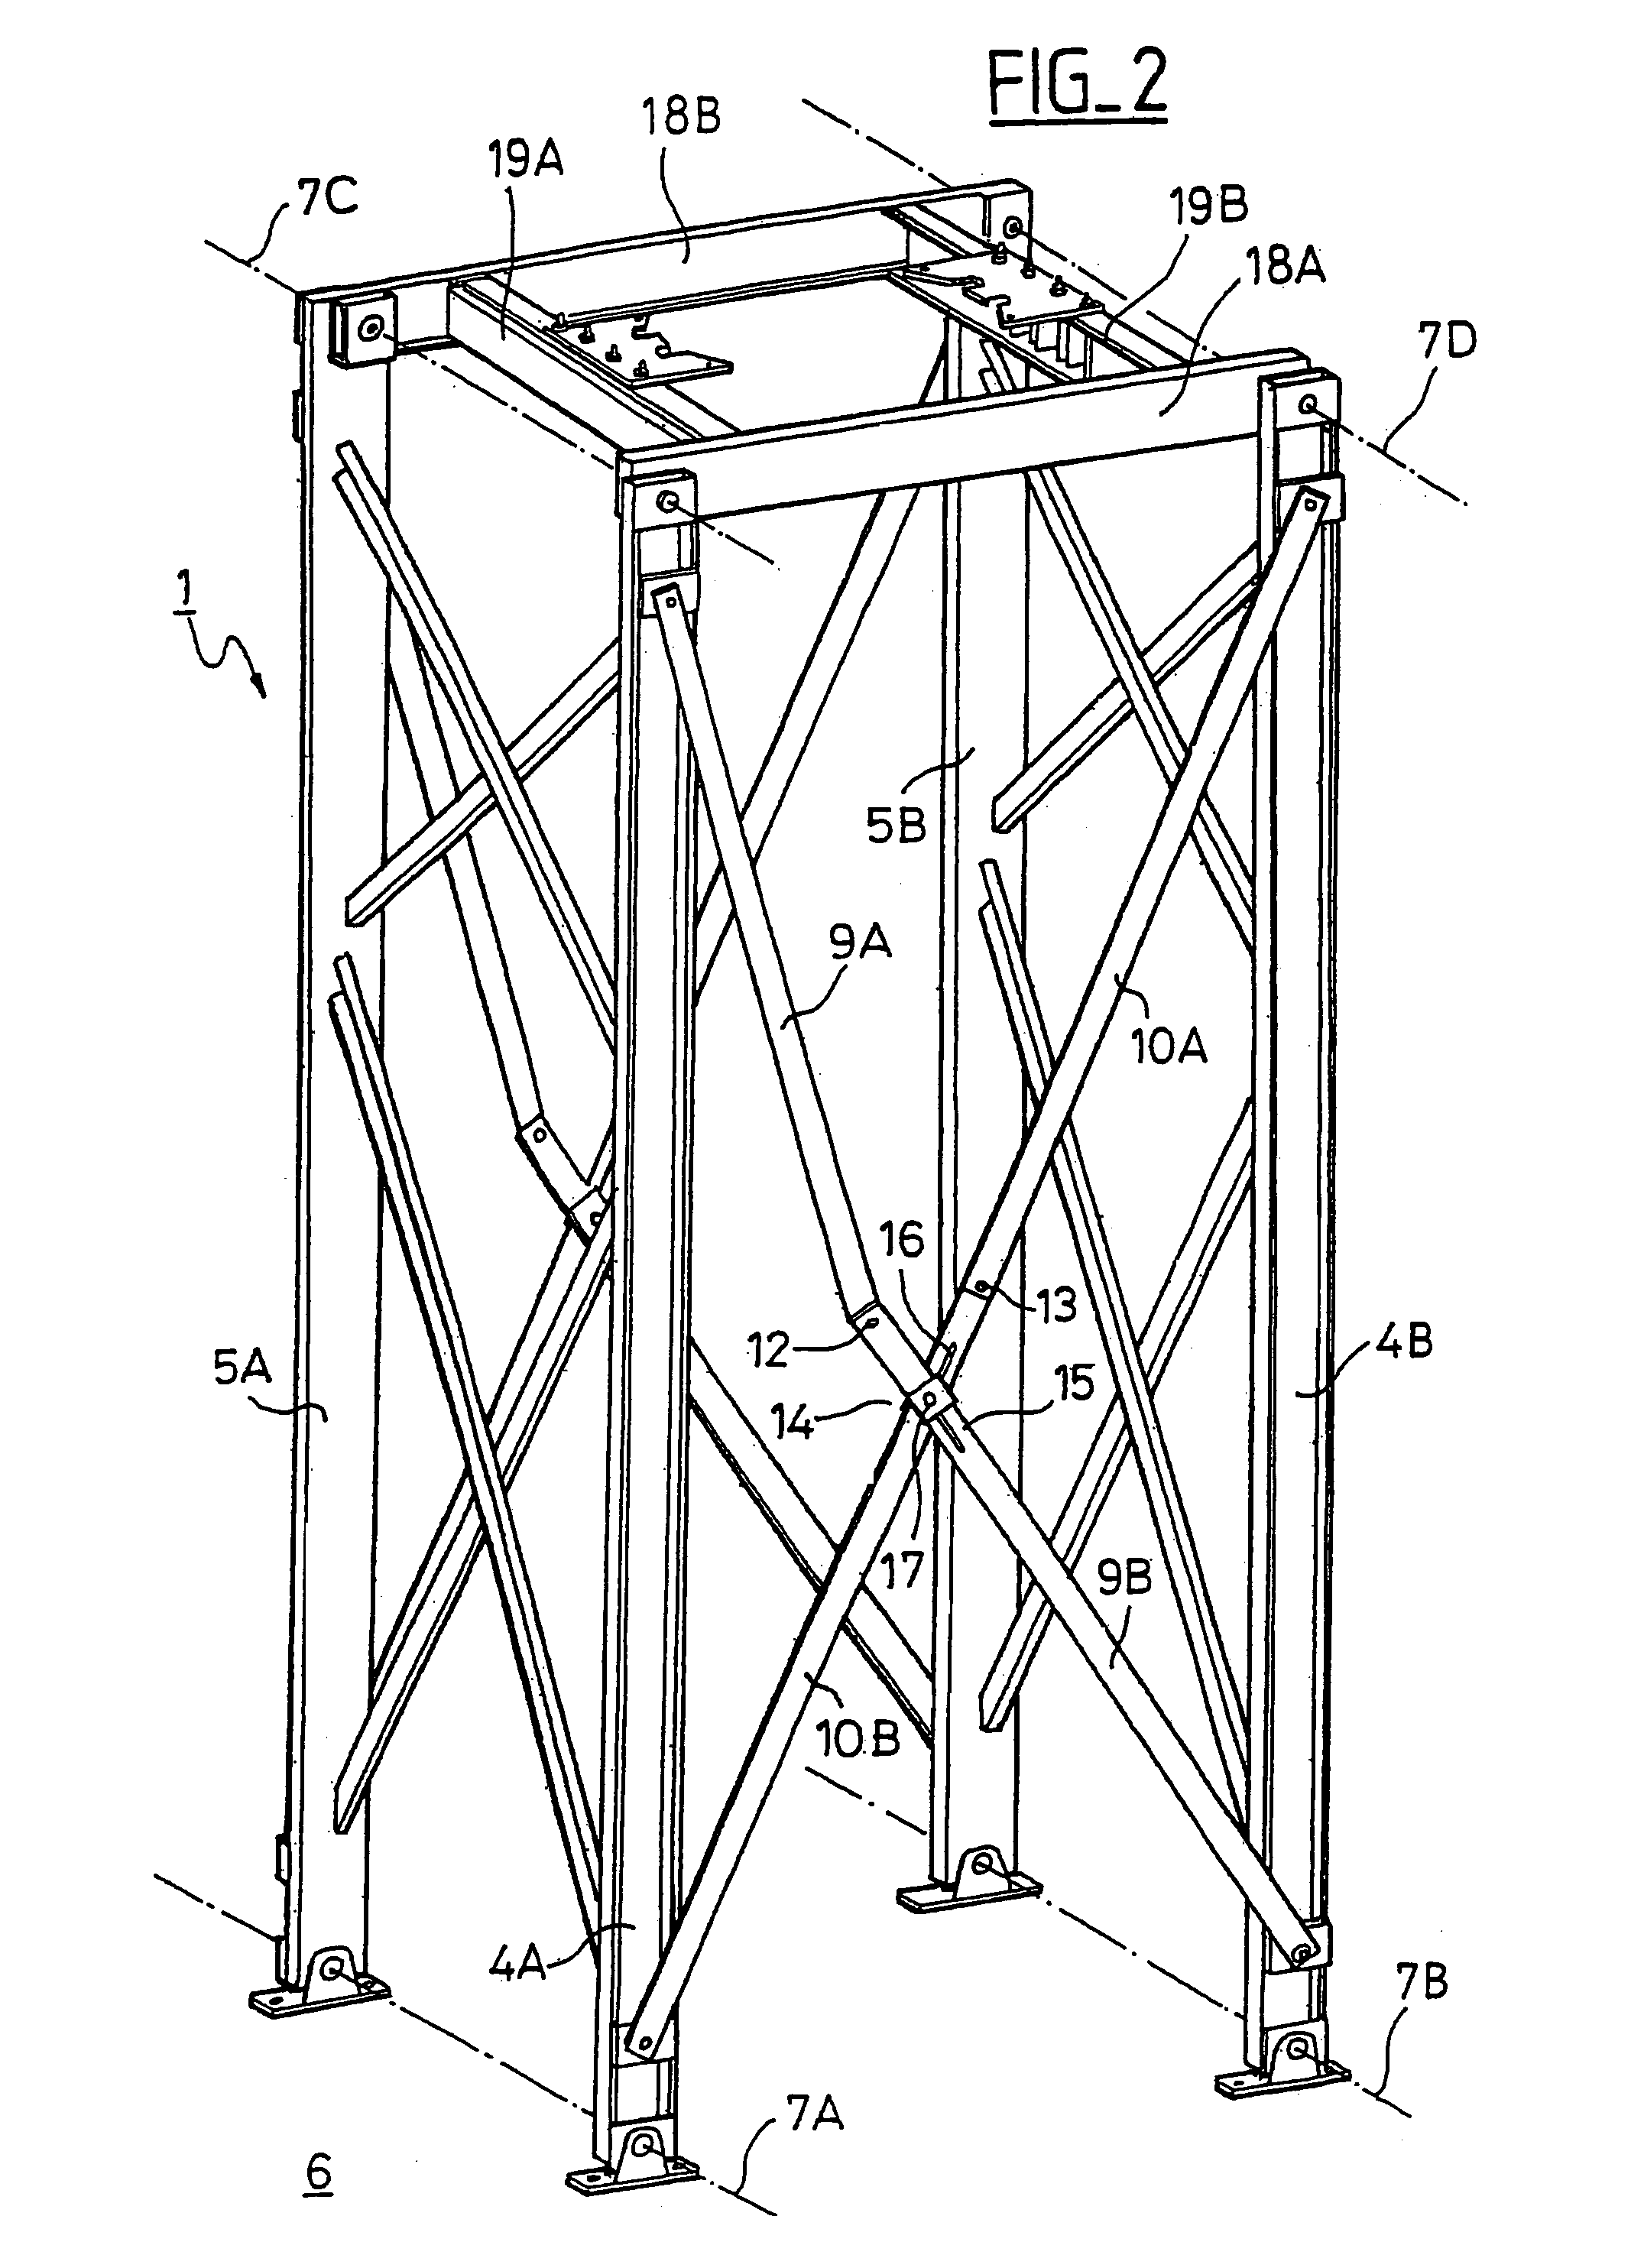 Articulated support with lateral movement for high-voltage or medium-voltage electrical plant